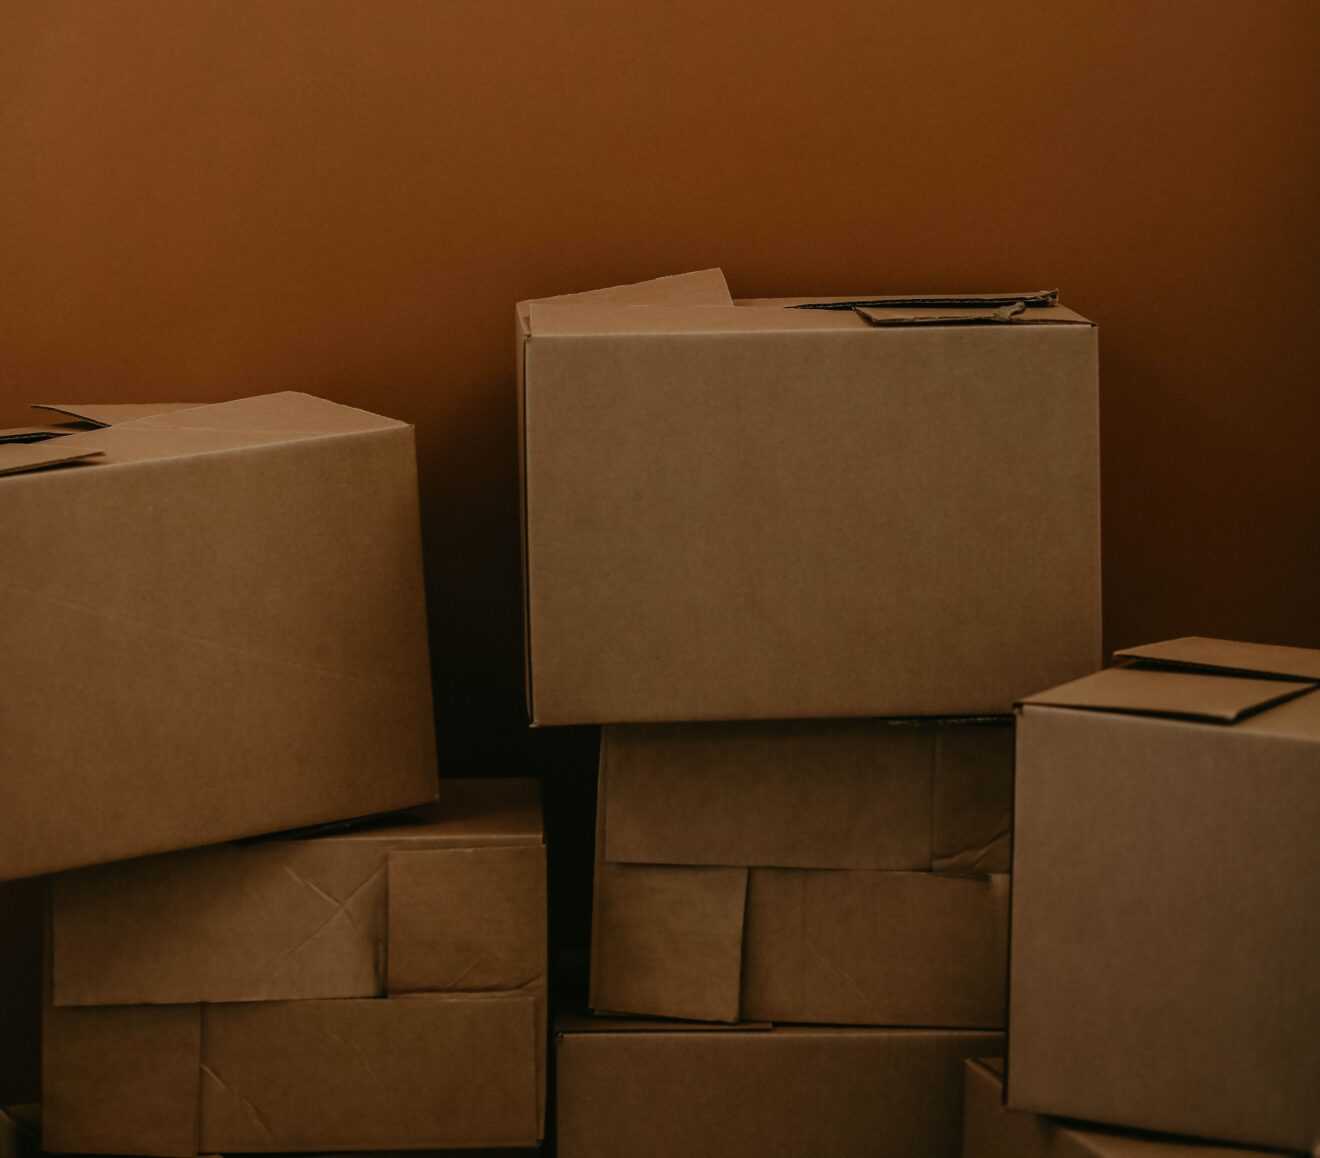 Image of boxes being packed for moving, which is another closing cost to consider when buying a house